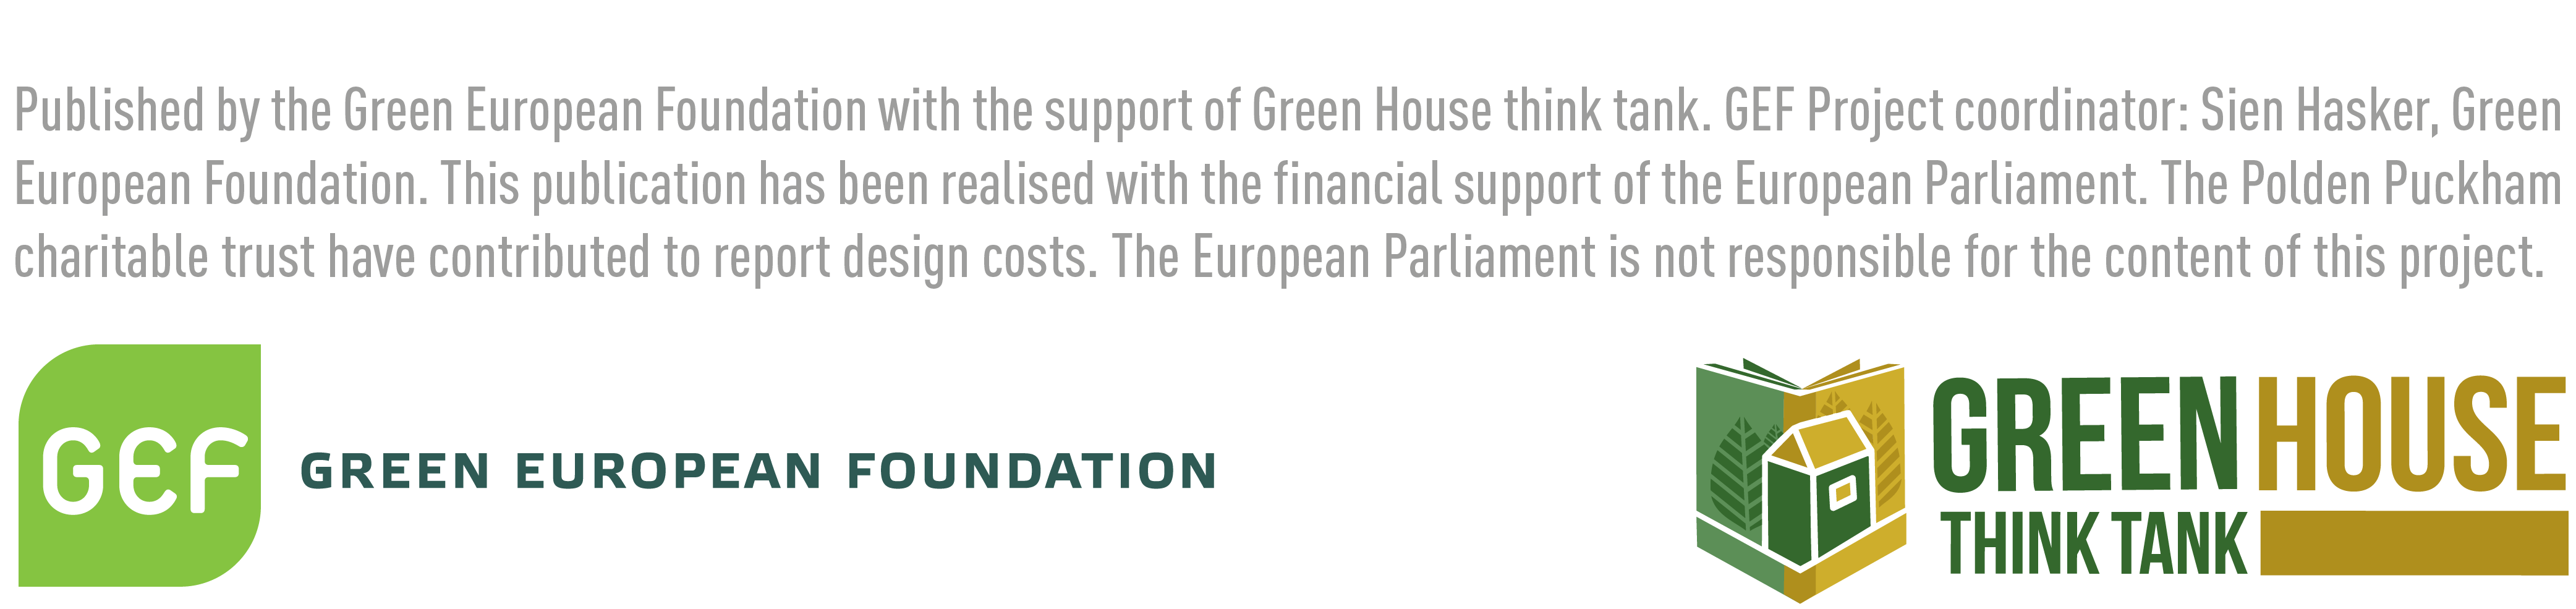 Images of the Green European Foundation and Green House Think Tank with text that readsPublished by the Green European Foundation with the support of Green House think tank. GEF project coordinator: Sian Hasker, Green European Foundation. This publication has been realised with financial support of the European parliament. The Polden Puckham charitable trust have contributed to the report design costs. The European Parliament is not responsible for the content of this project. 